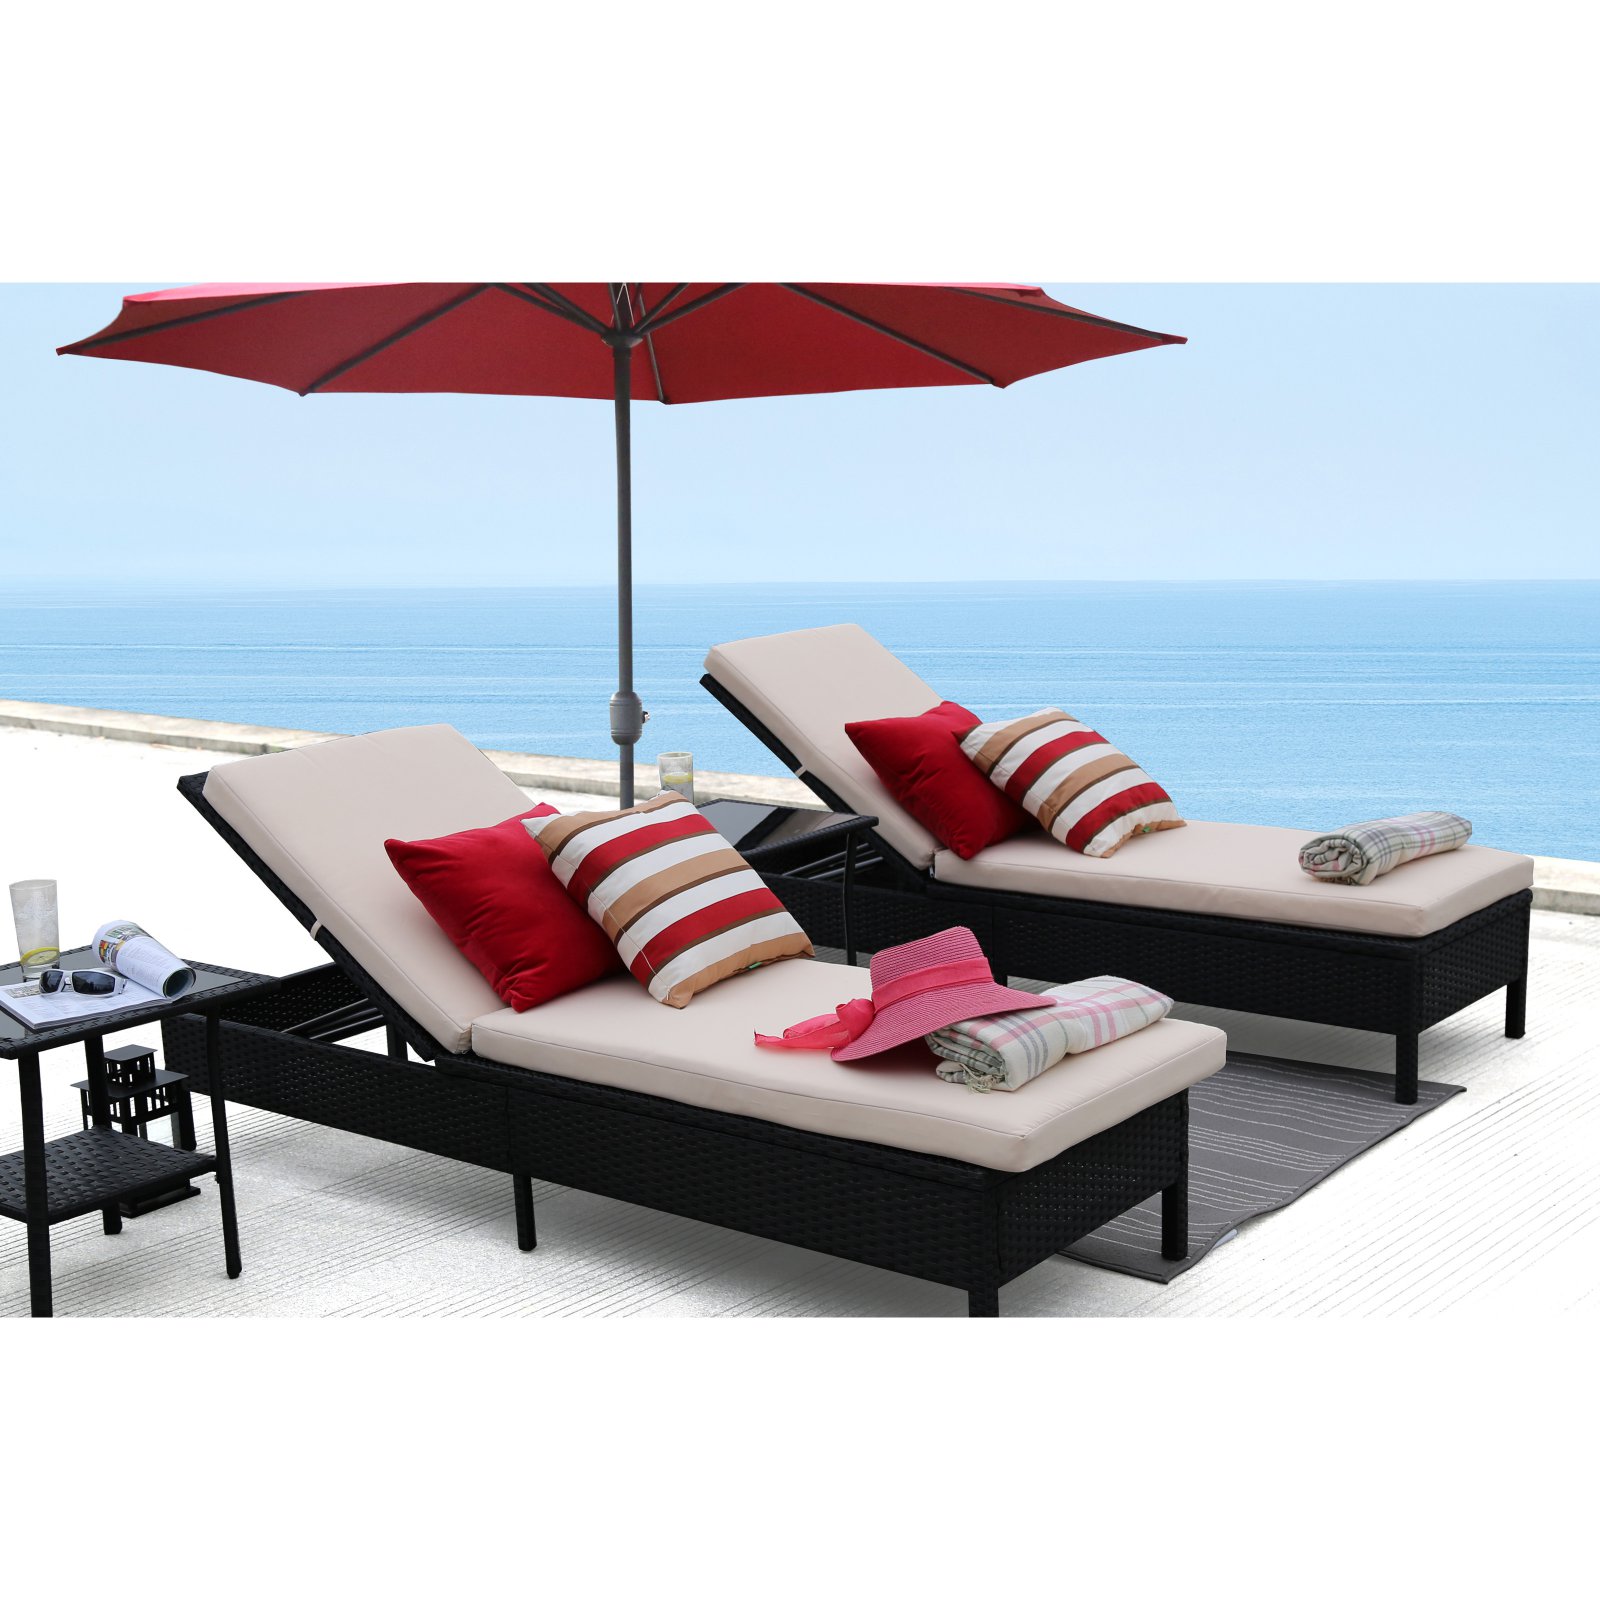 Baner Garden Adjustable Chaise Lounge with Cushions - image 1 of 9